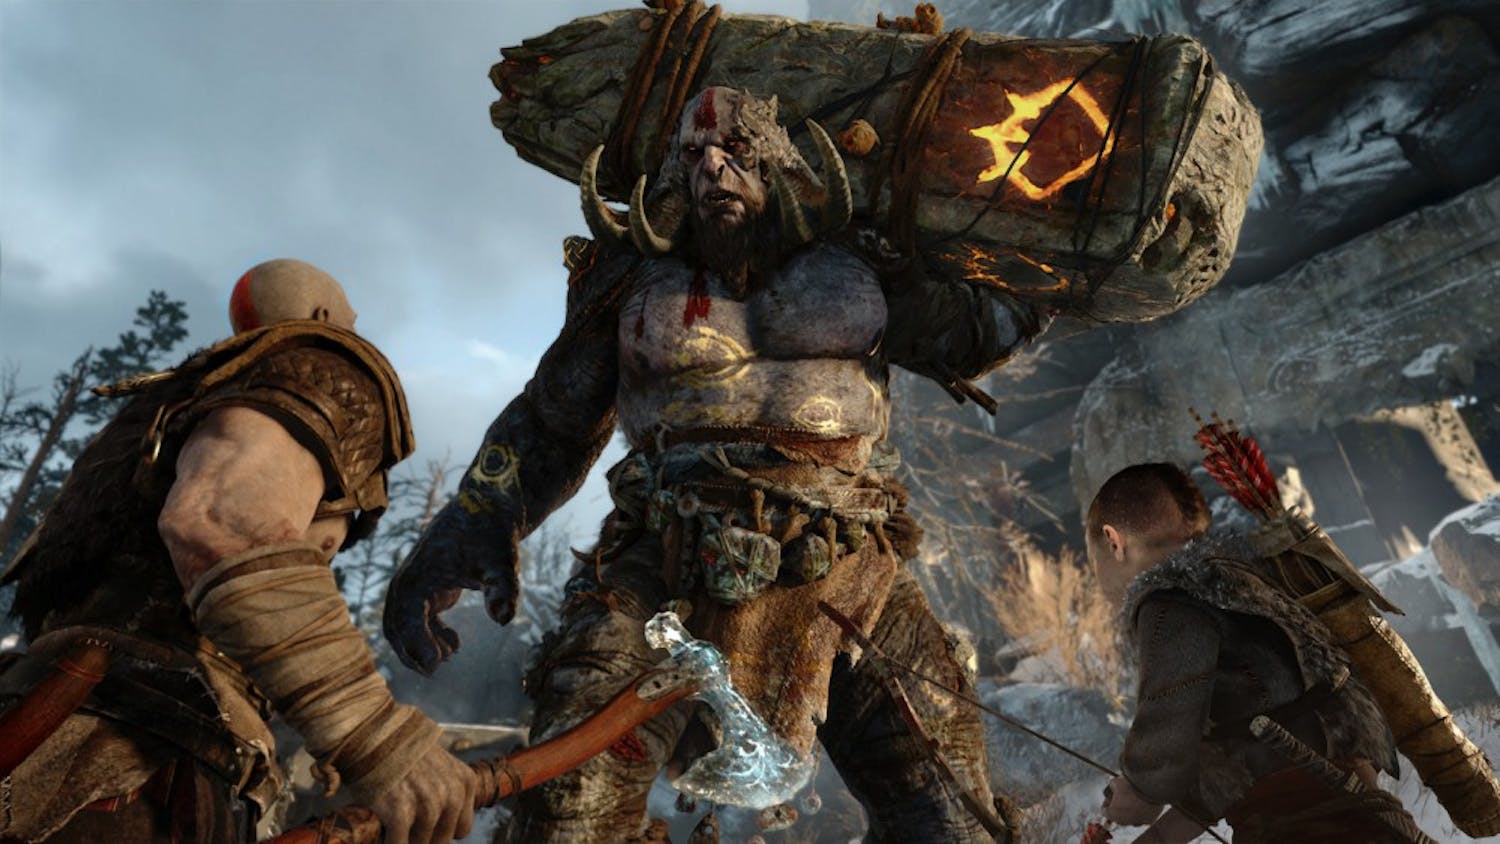 The new "God of War" was revealed at the Sony conference and will release exclusively on PS4.